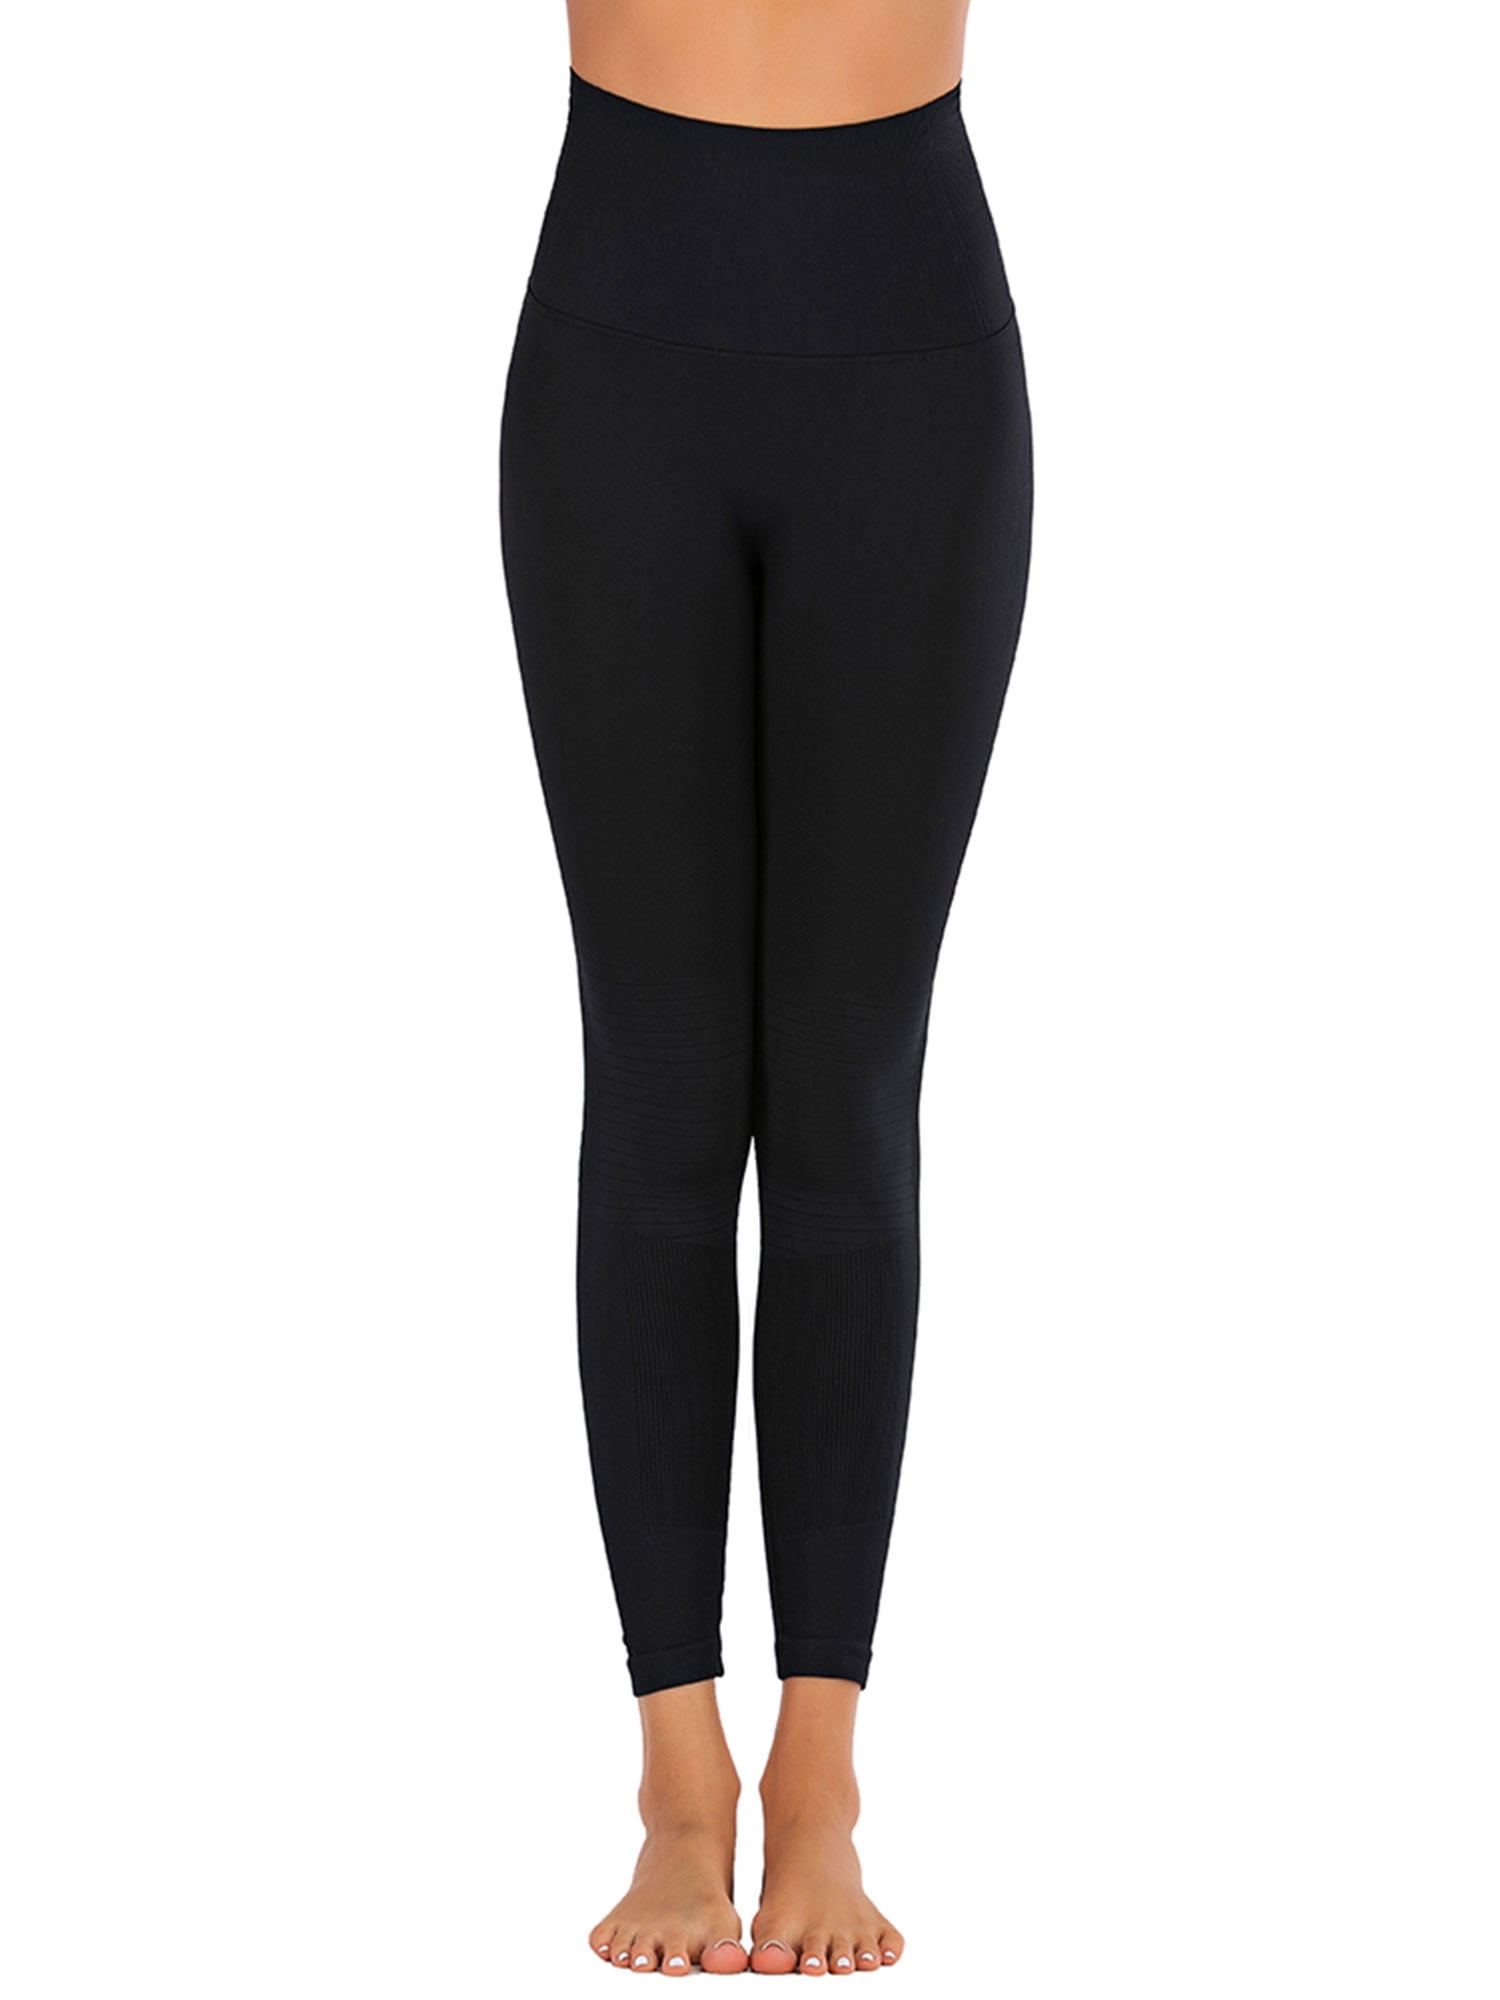 Womens High Waisted Yoga Leggings Pants Seamless fit Exercise Running Jogging 